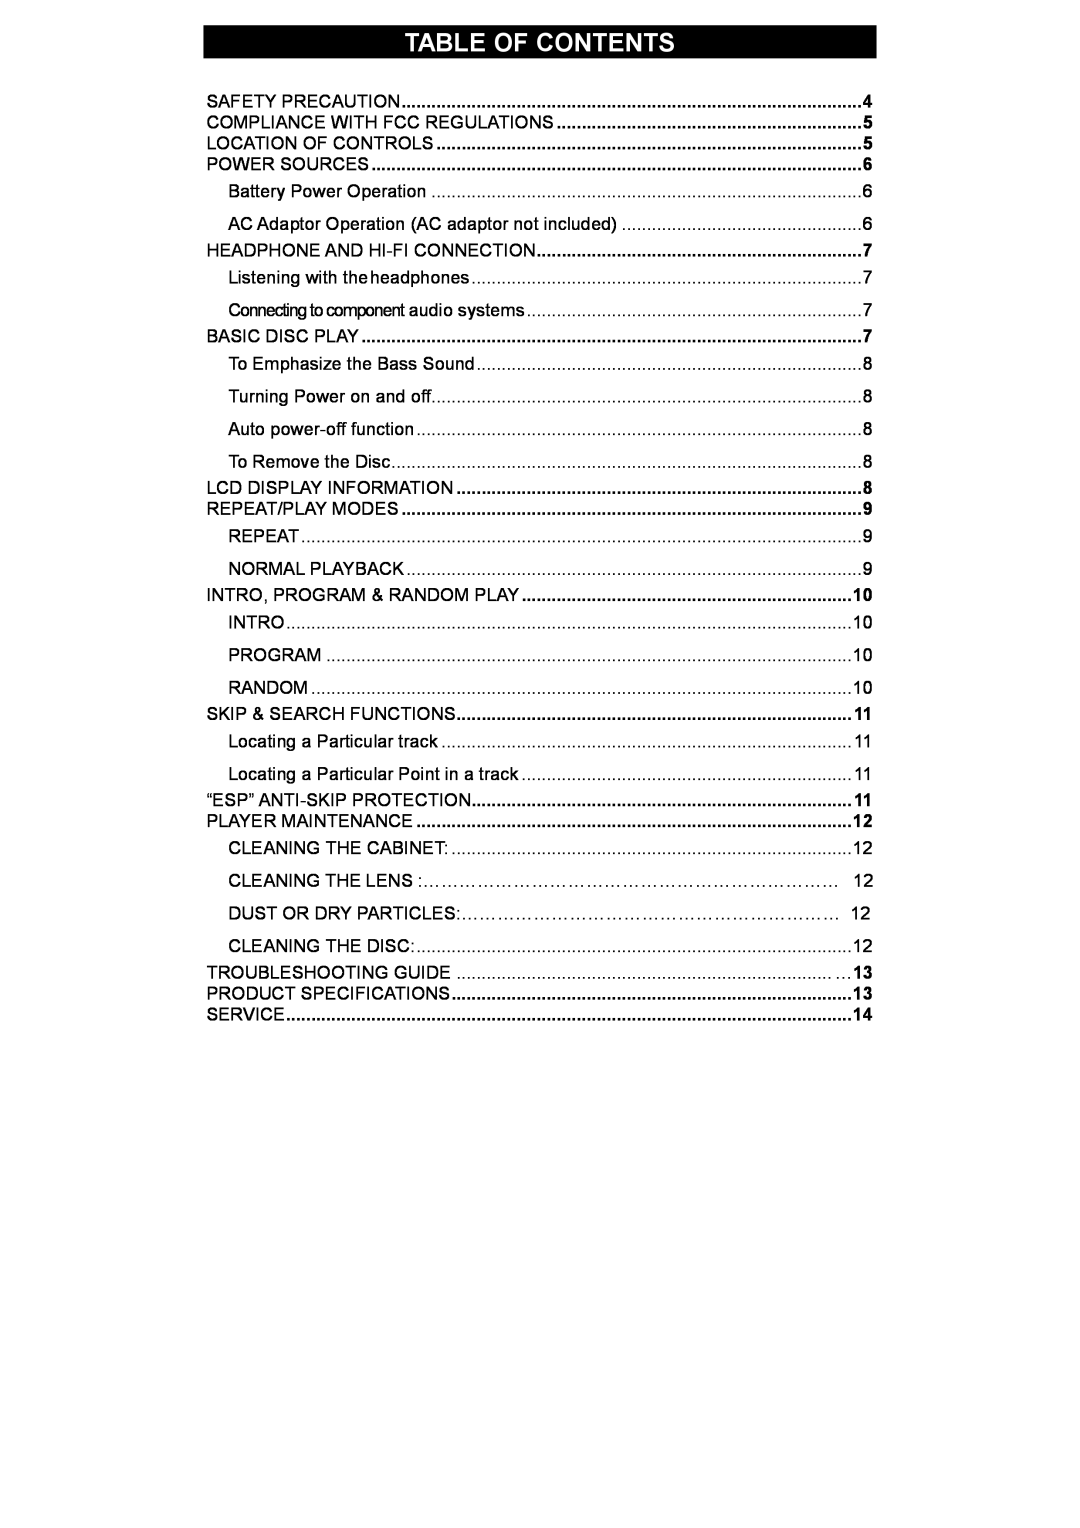 Spectra KT2038 owner manual Table Of Contents 